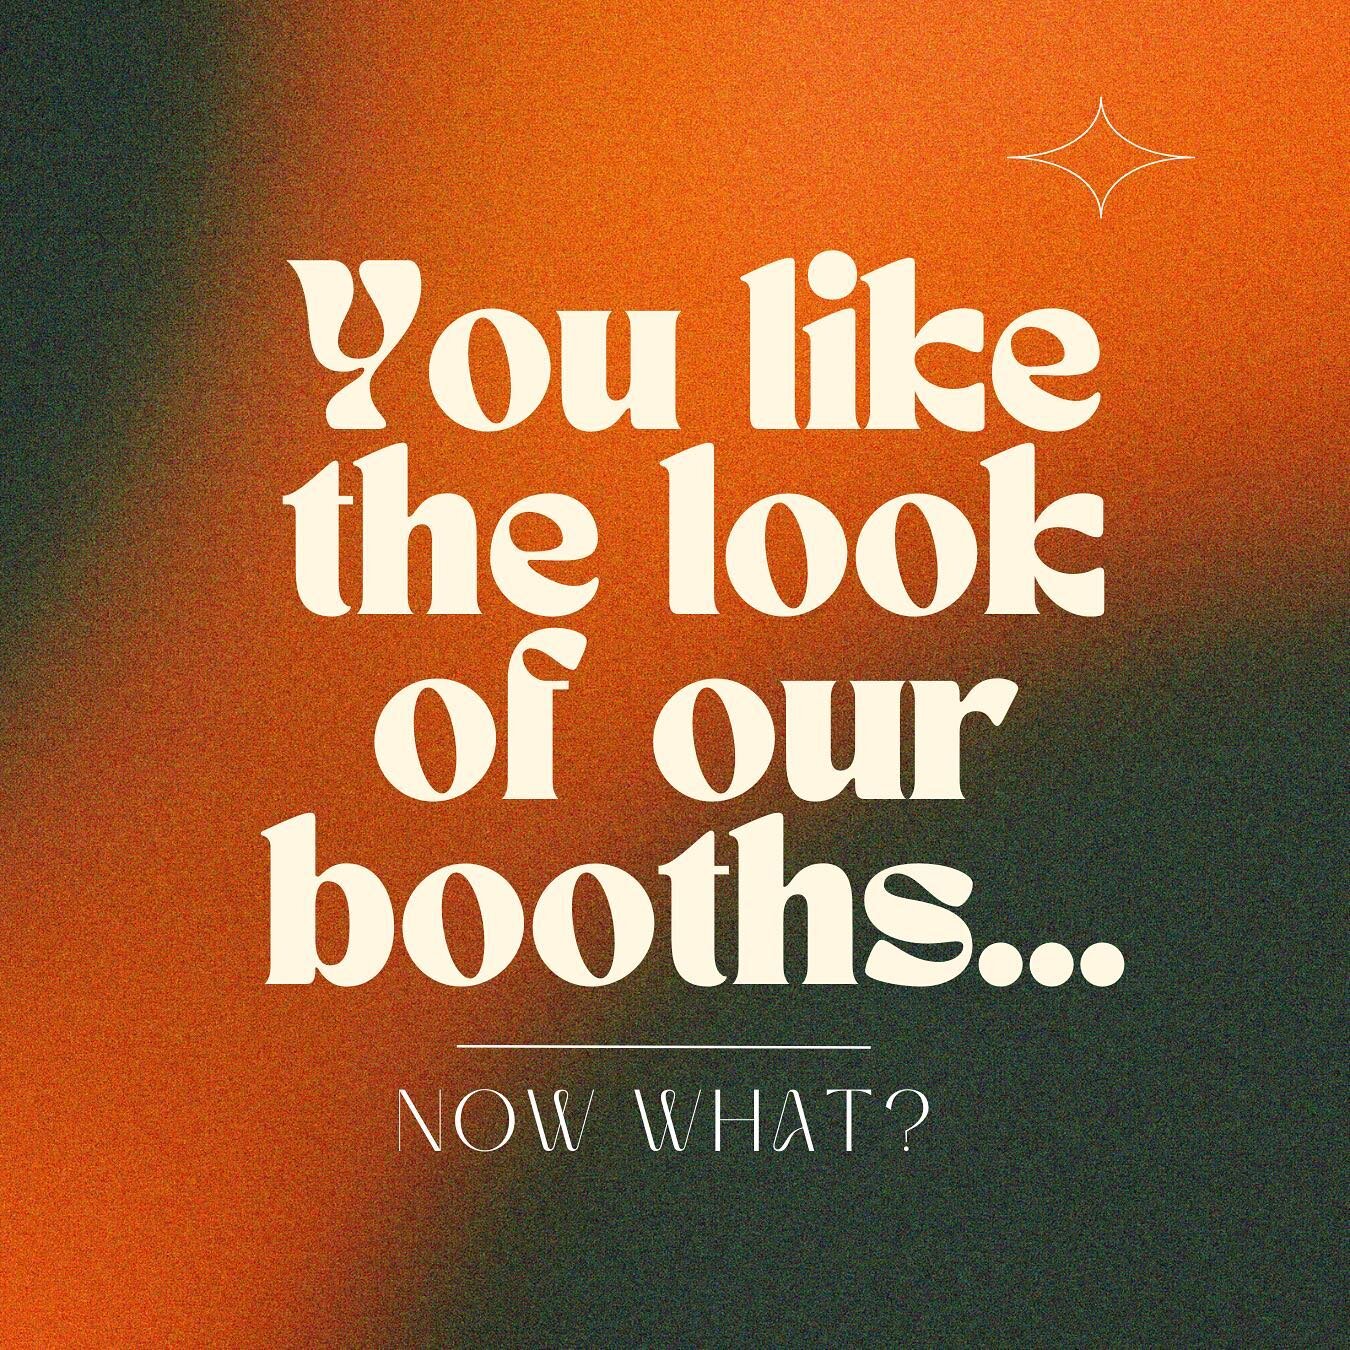 Curious on how to book? DM for more information 🥳

#photobooth #ohphotobooth #retrophotobooth #antiquephotobooth #weddingphotobooth #partyphotobooth #weddinginspo #howtobook #bookabooth #weddingentertainment